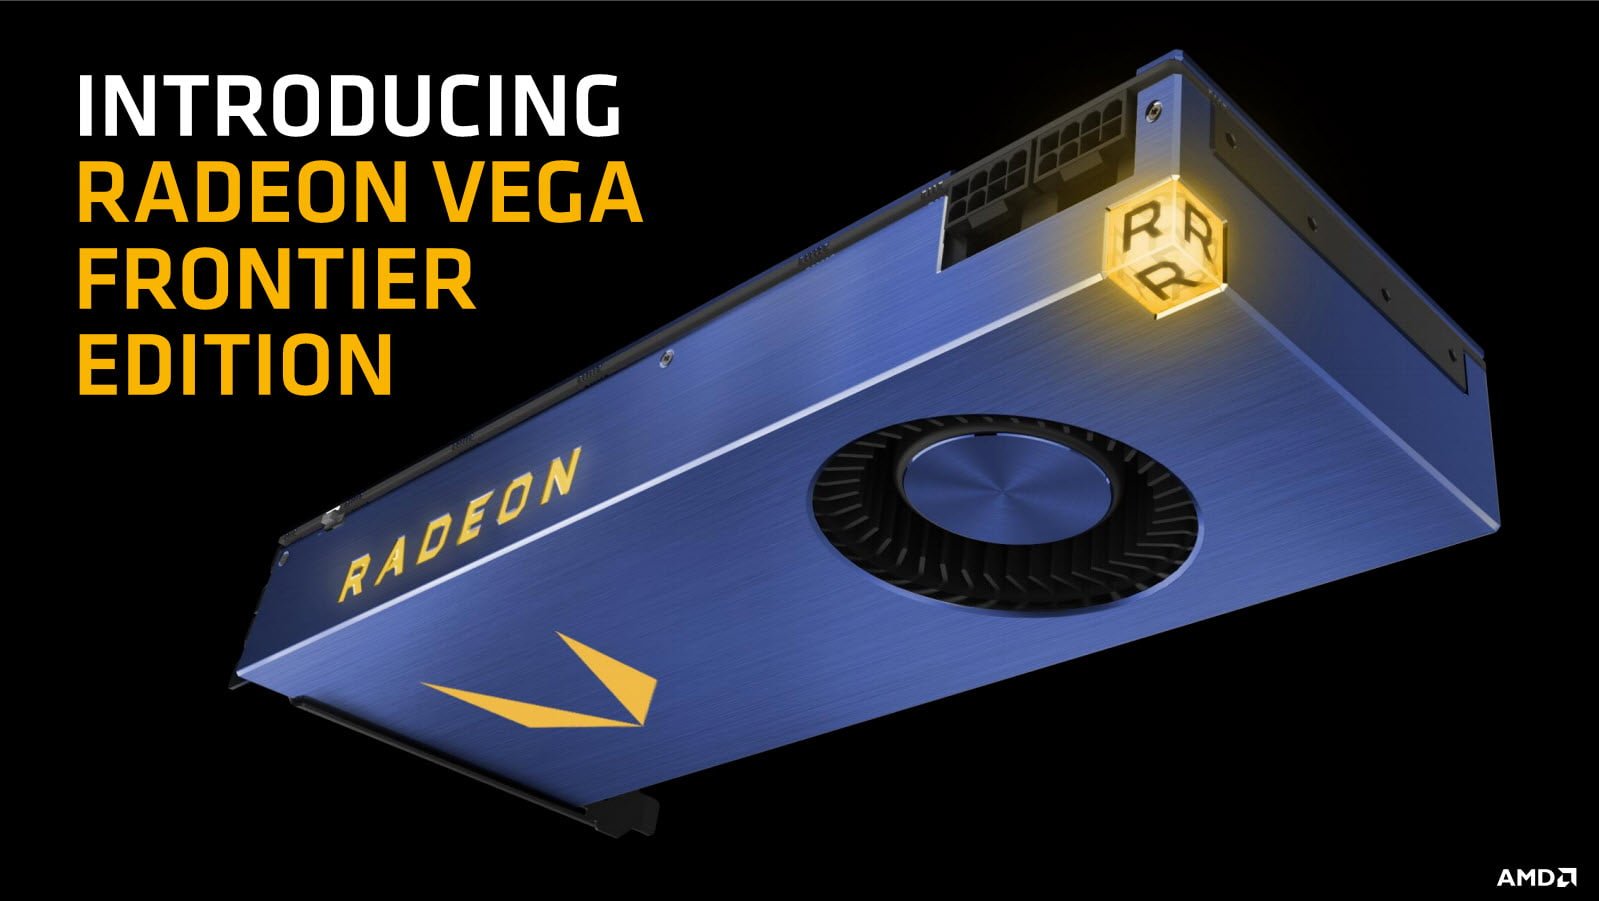 AMD Vega Frontier Edition vs Titan Xp Previewed: Faster than Titan Xp in Compute, Strong Gaming Performance